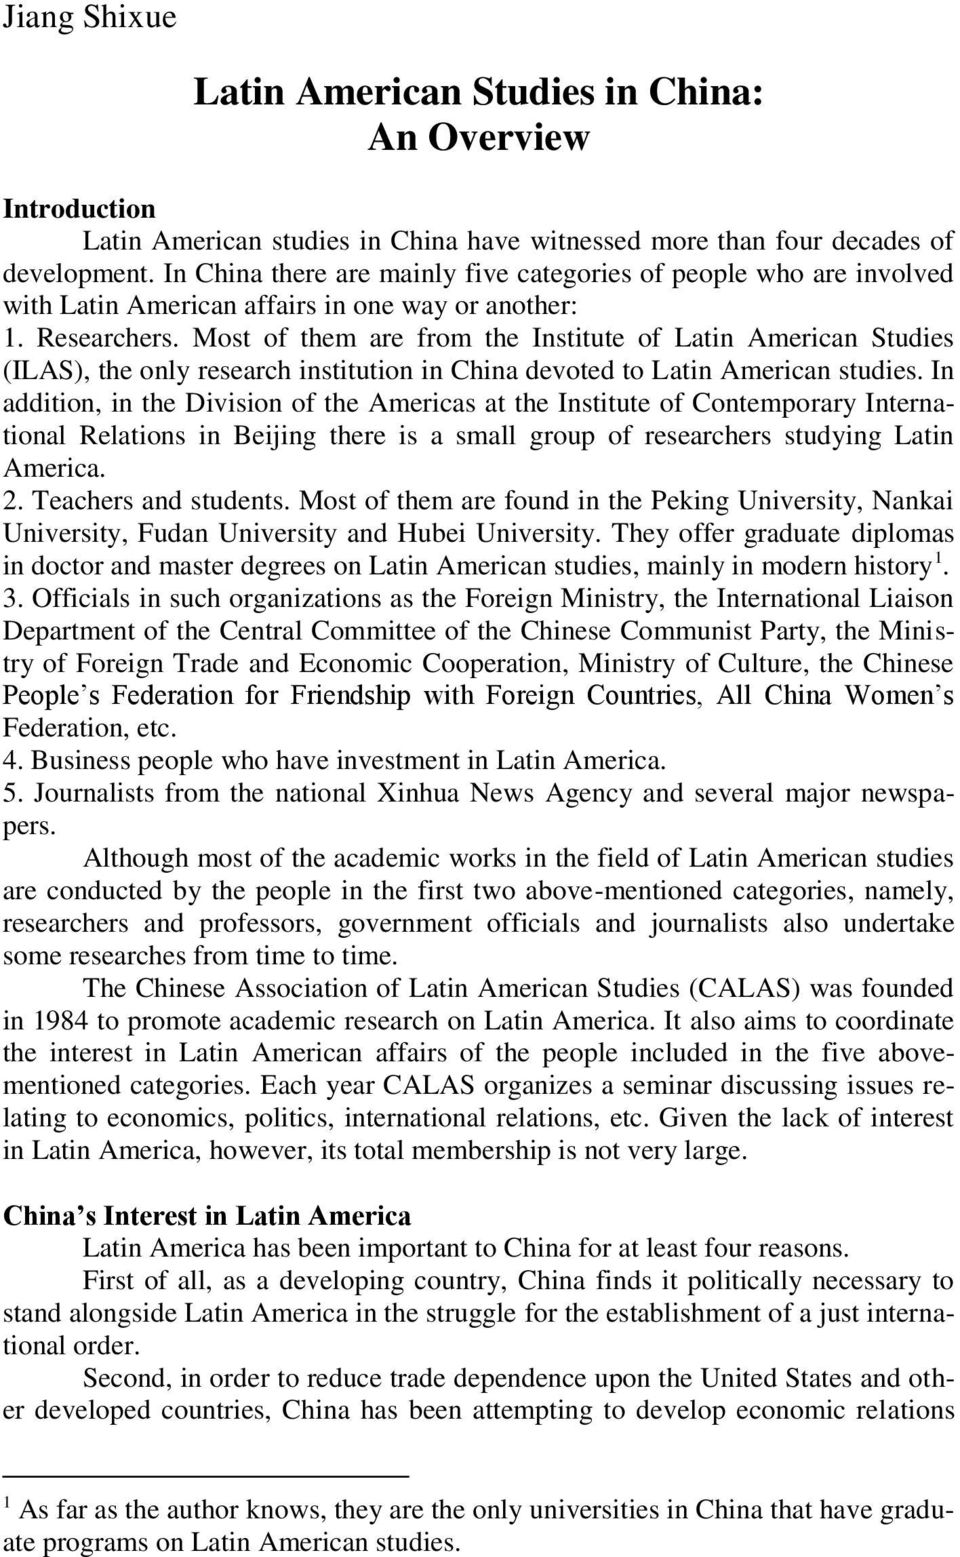 Most of them are from the Institute of Latin American Studies (ILAS), the only research institution in China devoted to Latin American studies.